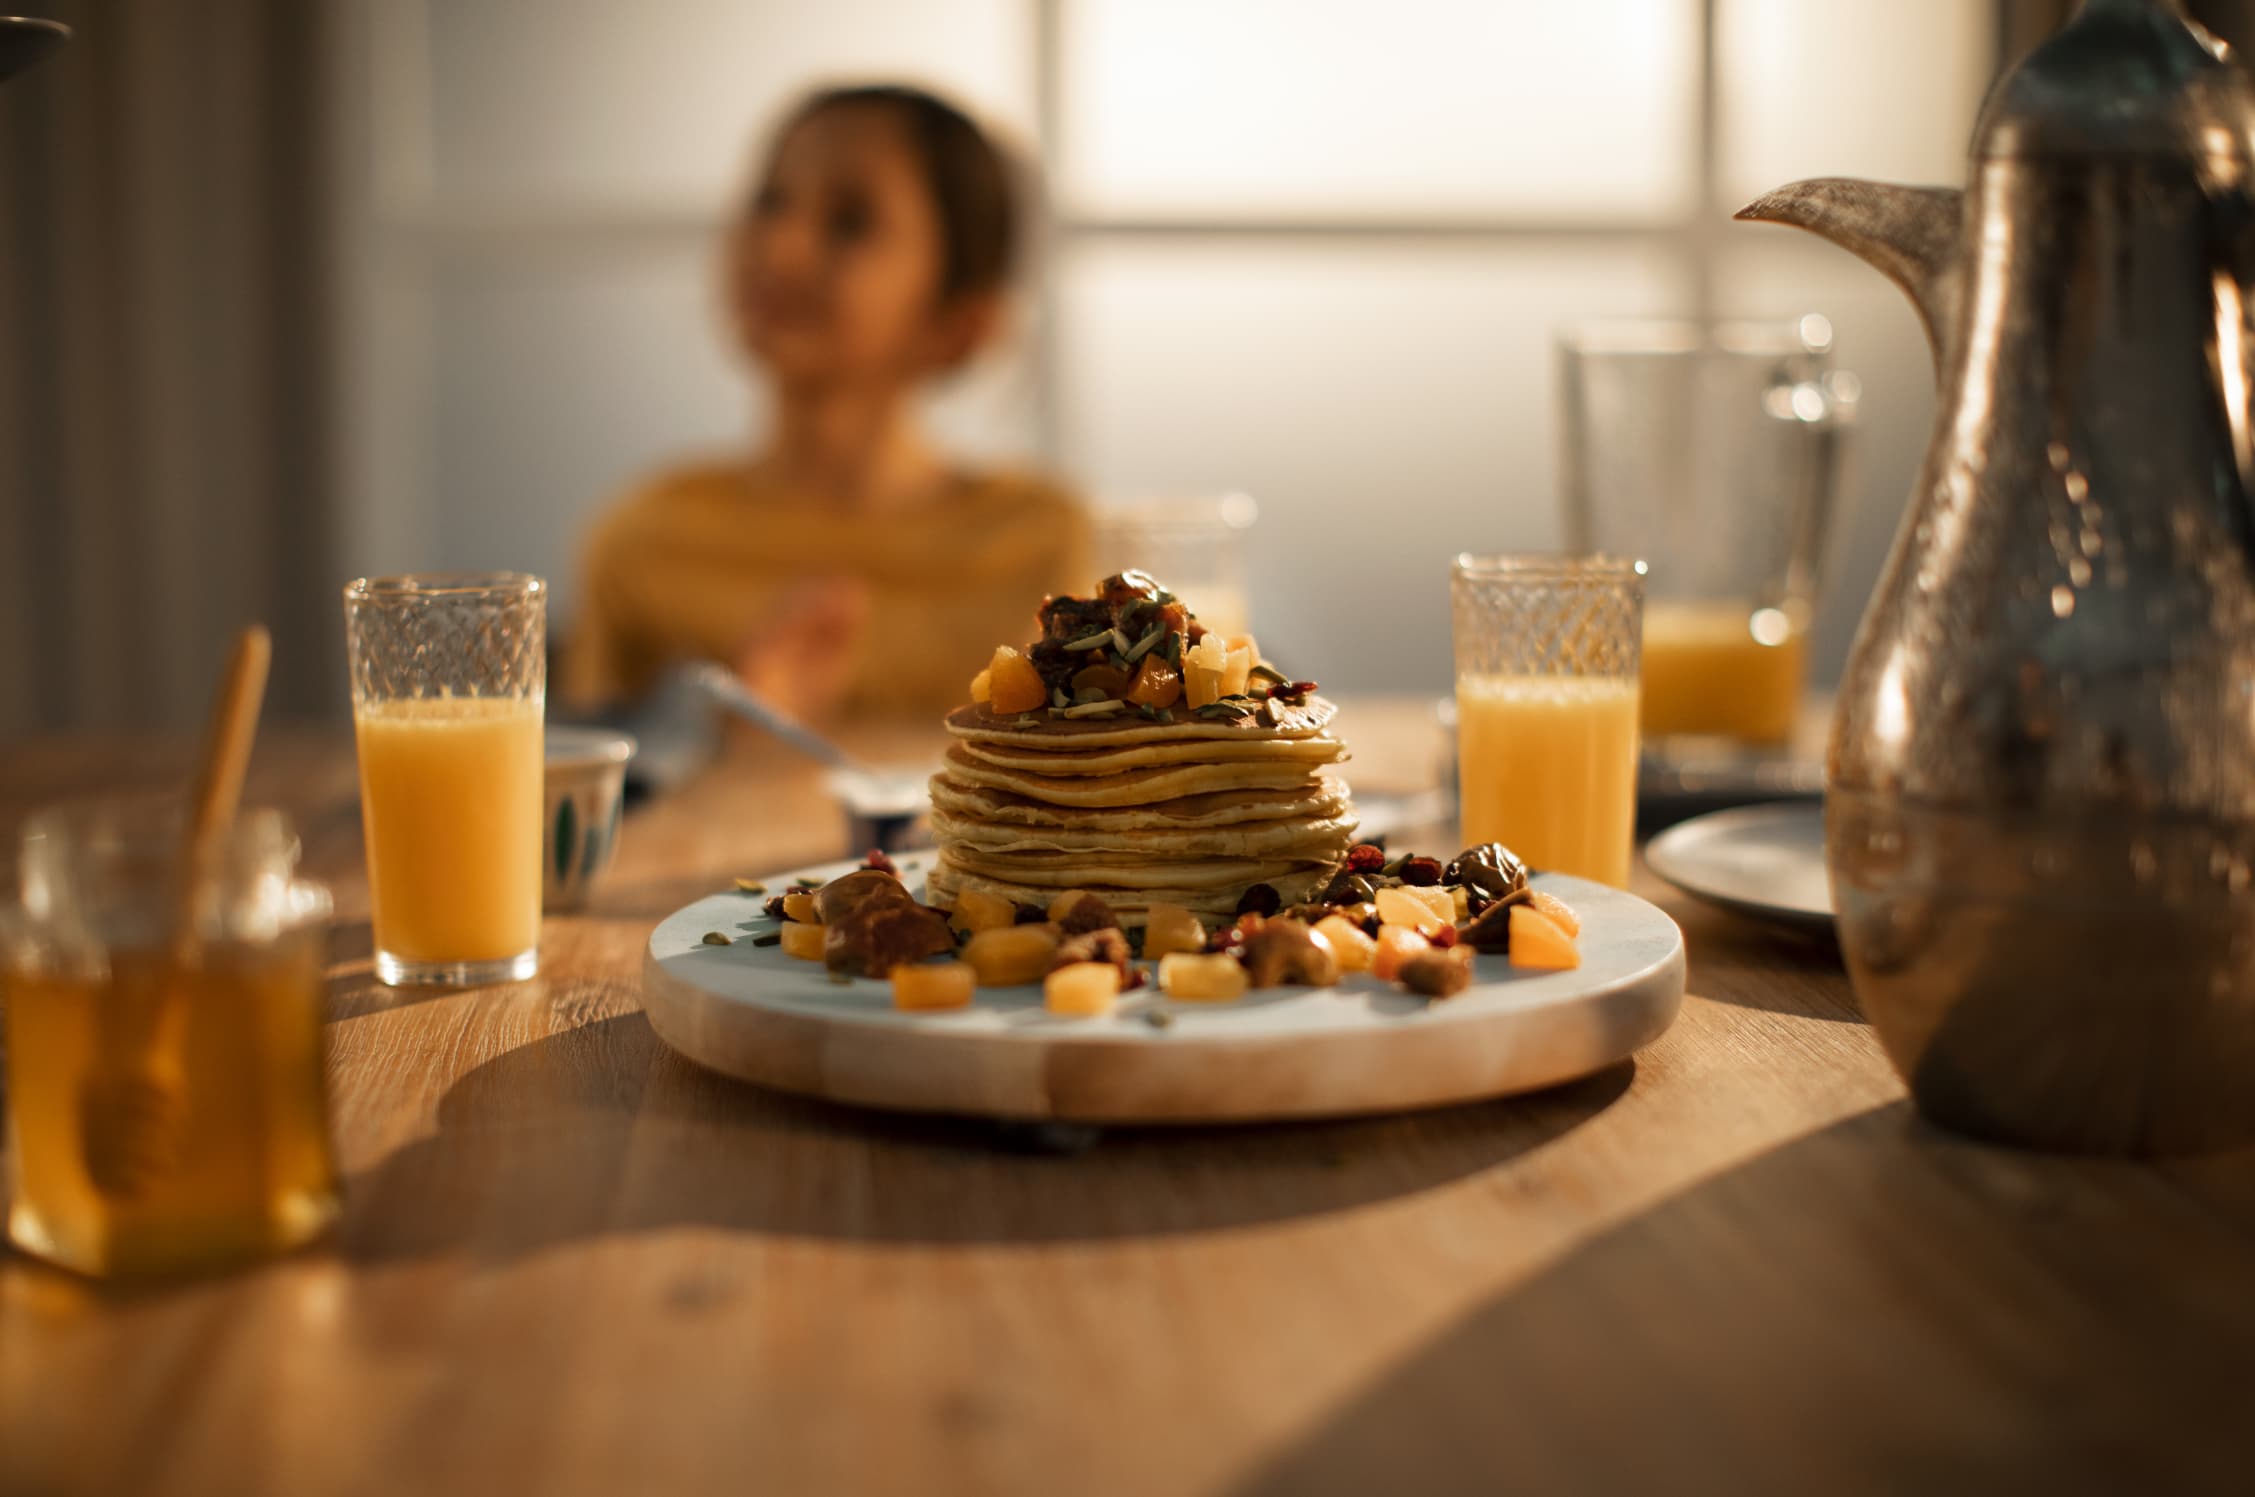 Saffron & Rosewater Pancakes with Dried Fruits and Natural Cream Cheese